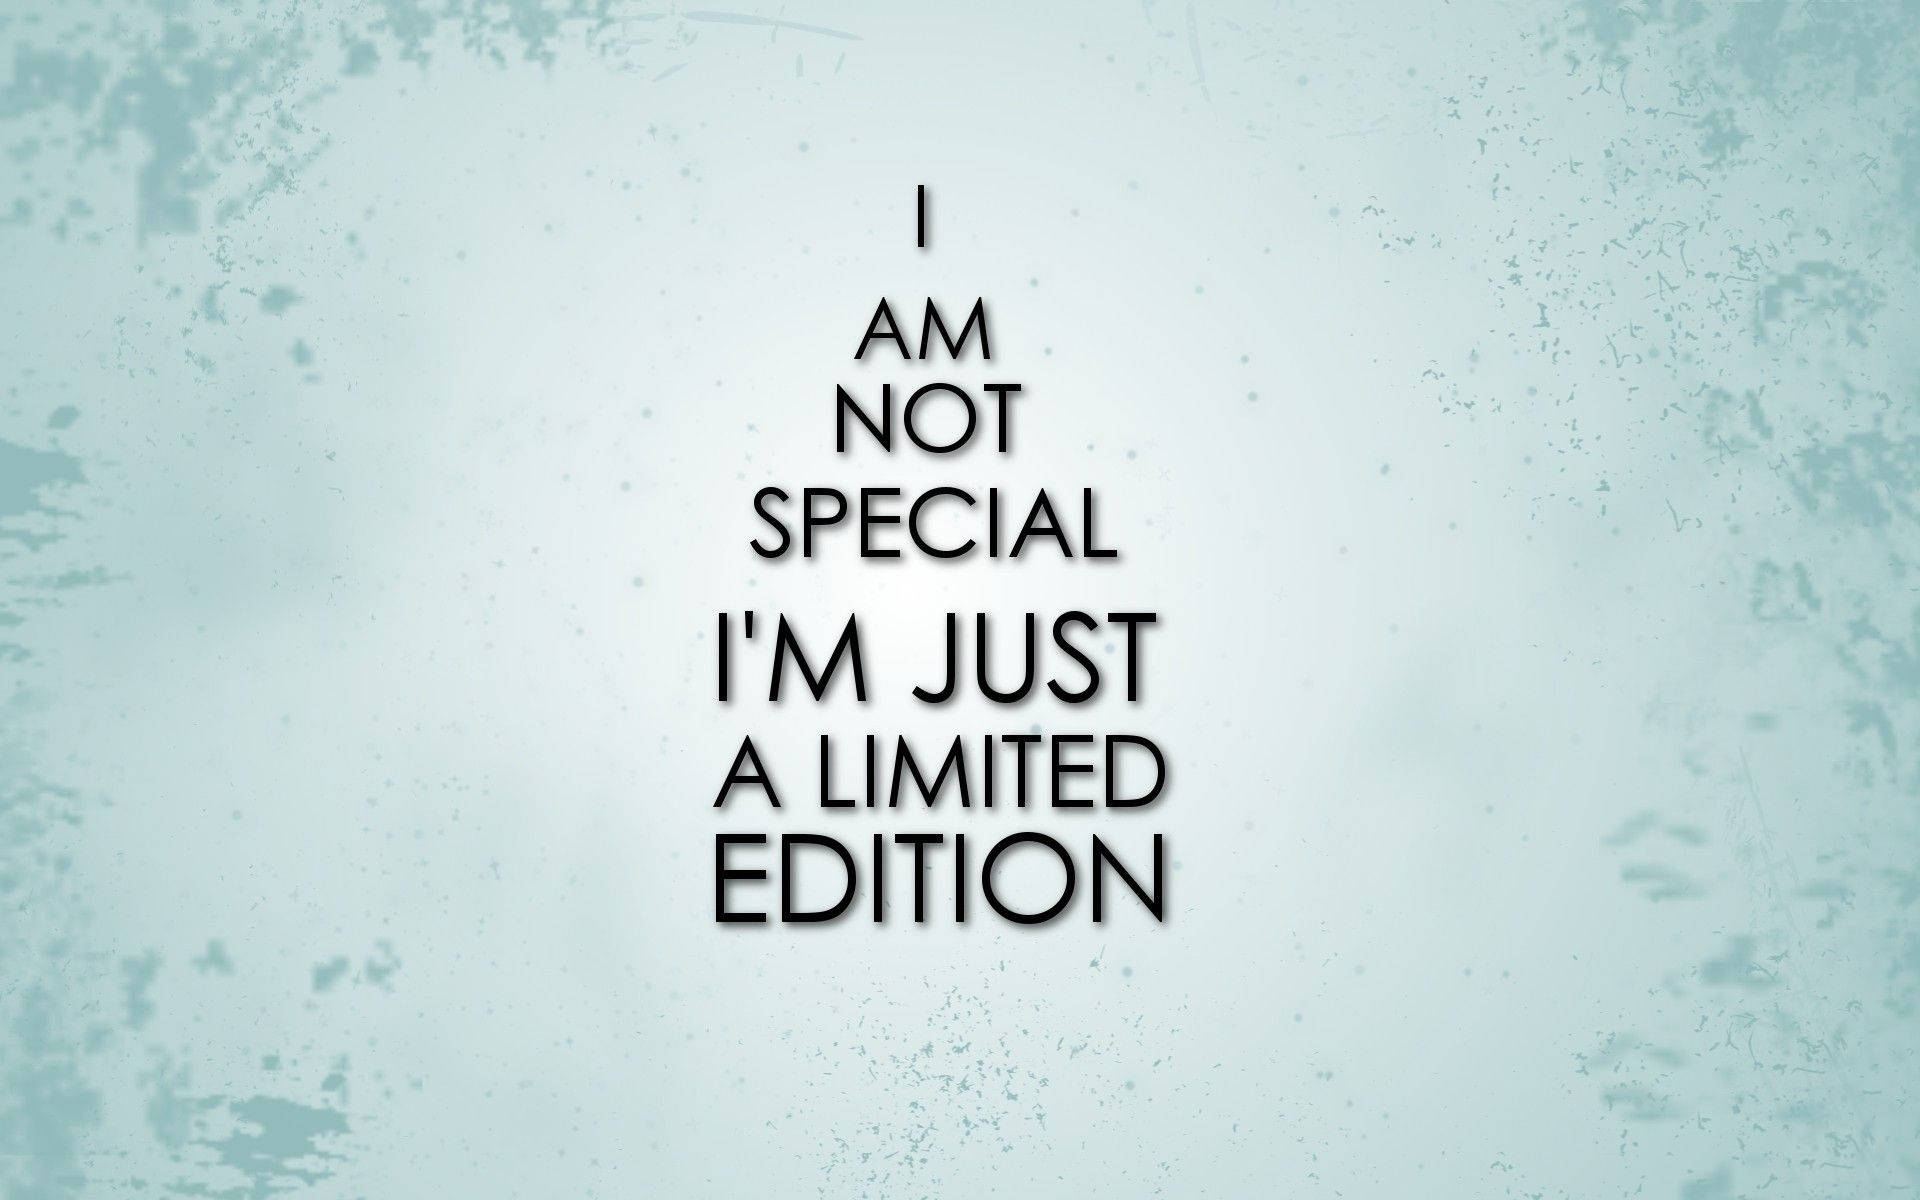 Special Edition Quotes Laptop Wallpaper